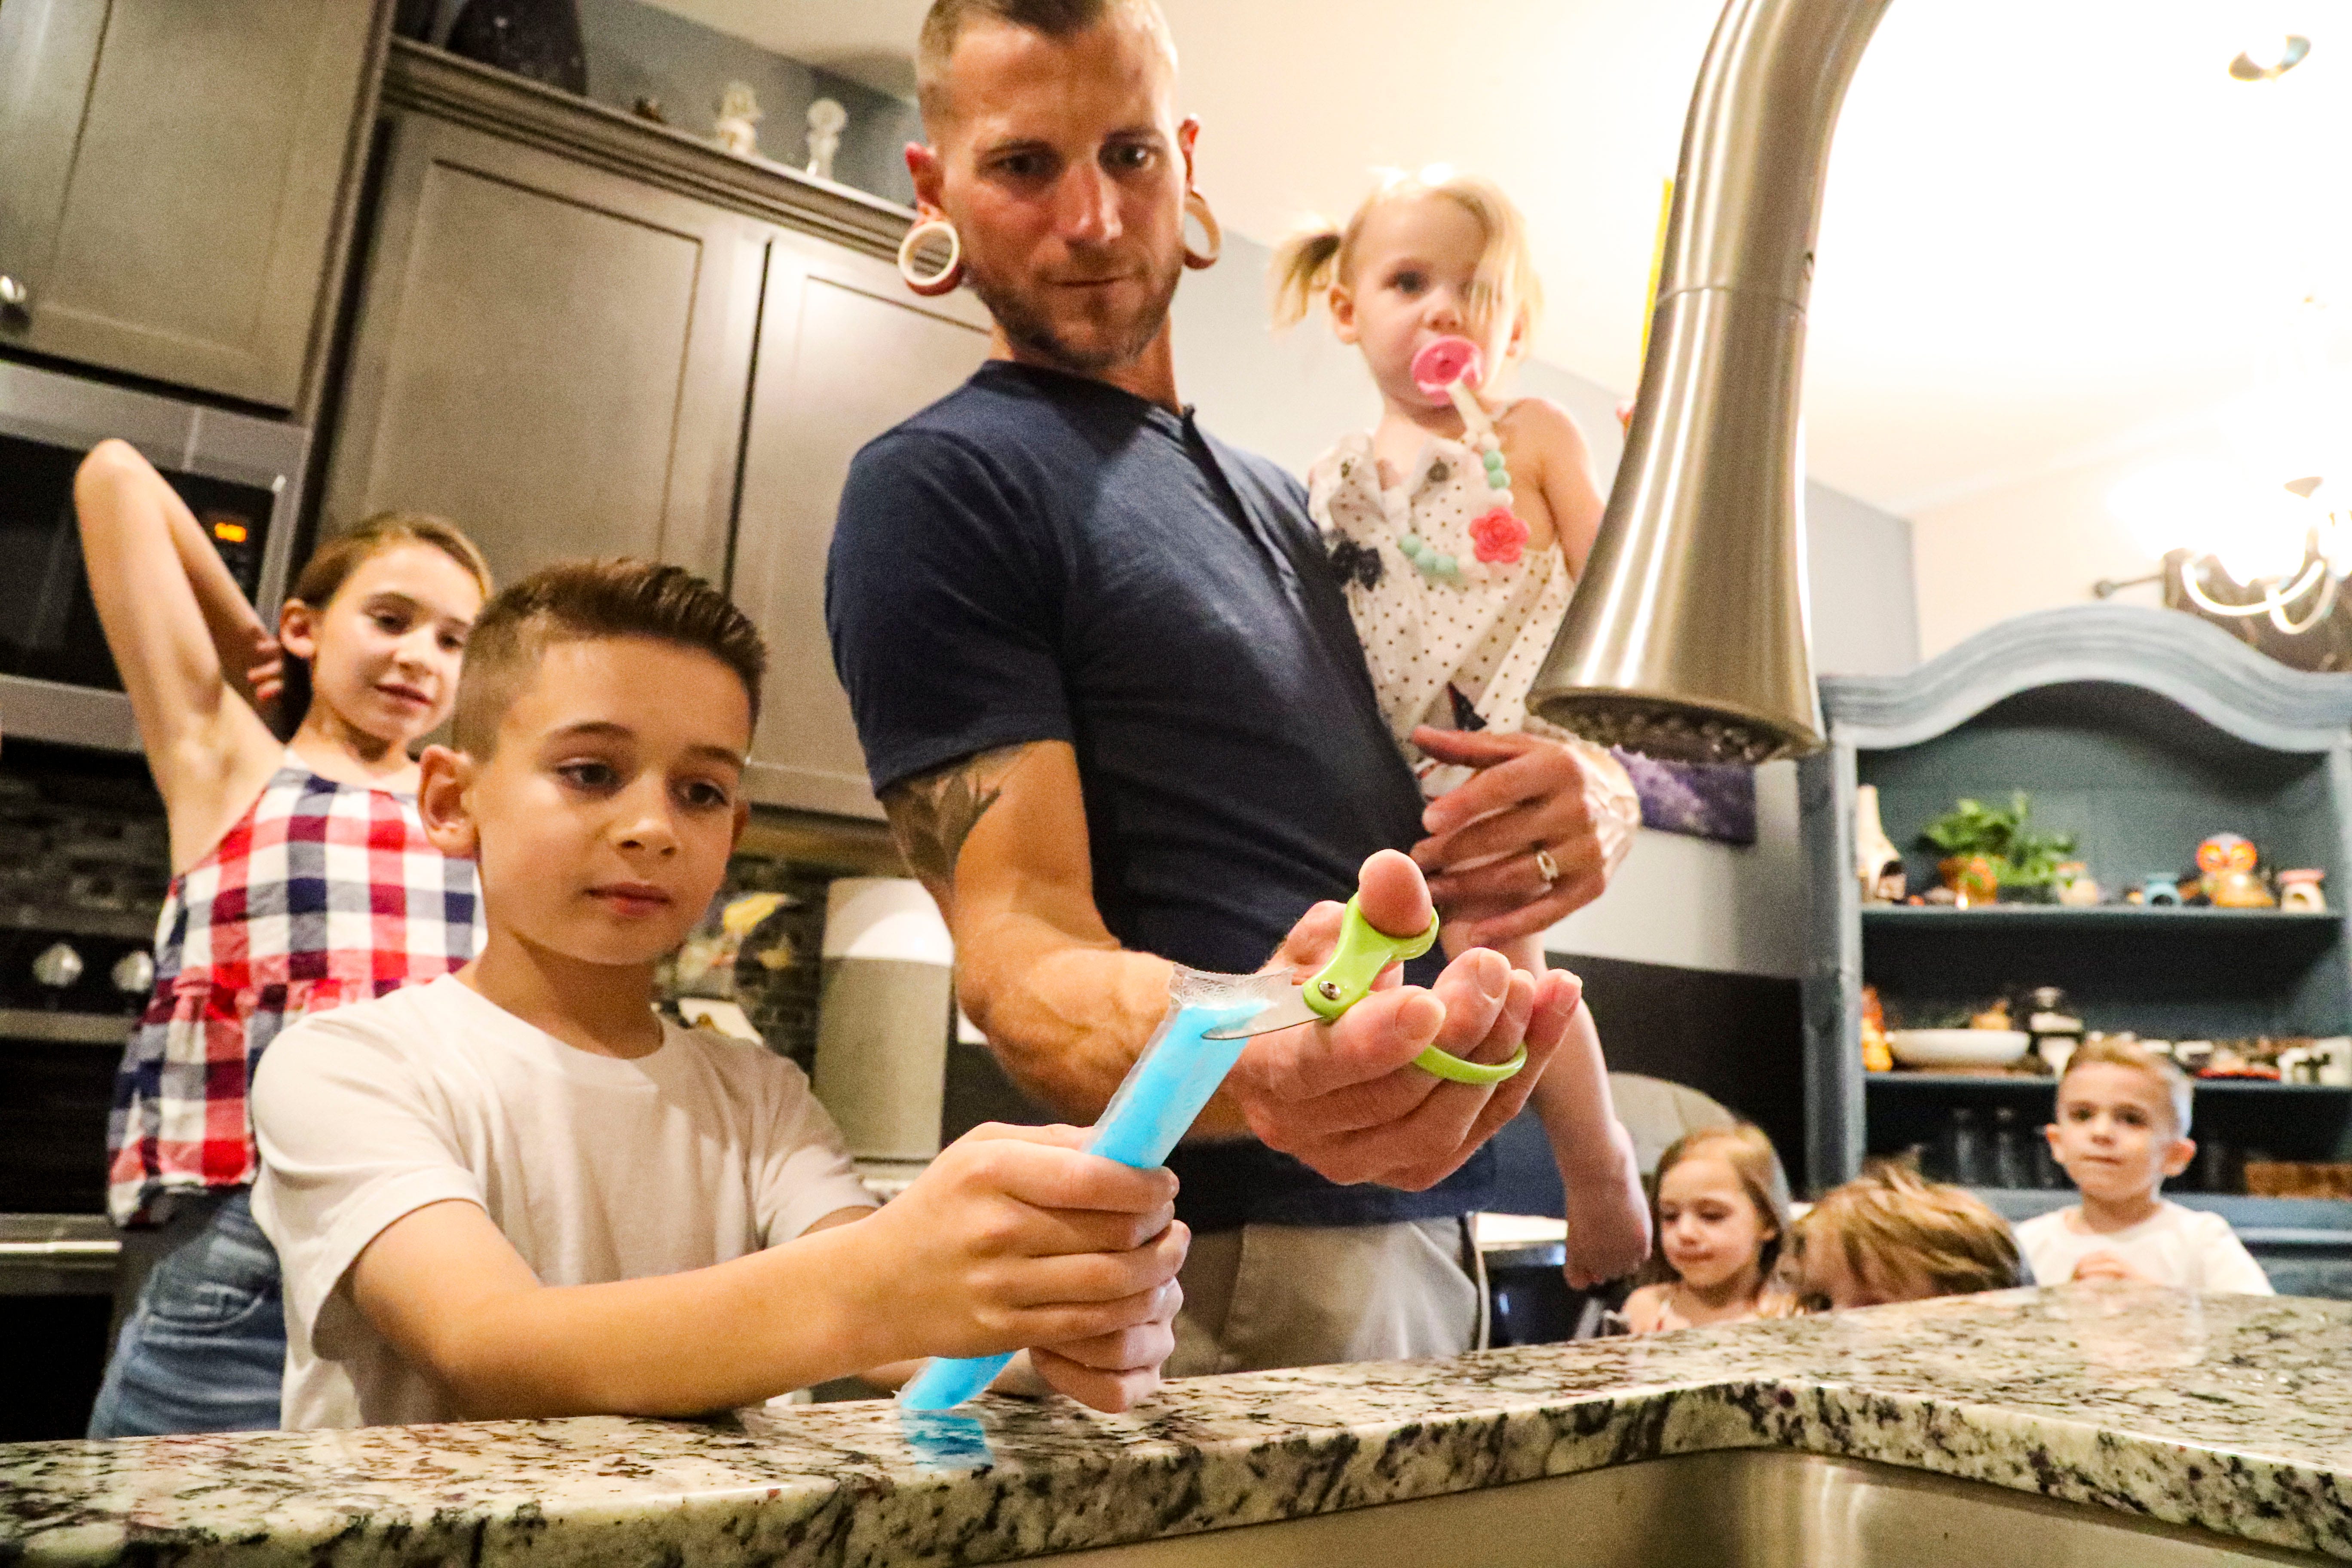 Kurt opens a popsicle for Nathaniel. Erin and Kurt Zeigler and their 6 children; Maddison, 11, Nathaniel, 8, Aaron, 5, Freya, 3, Sebastian, 2, Airis, 1. They live in a new construction home in Fort Myers that their landlords are now raising their rent by overt $1,000. They are looking for a new place to live, but that his hard with such a large family.